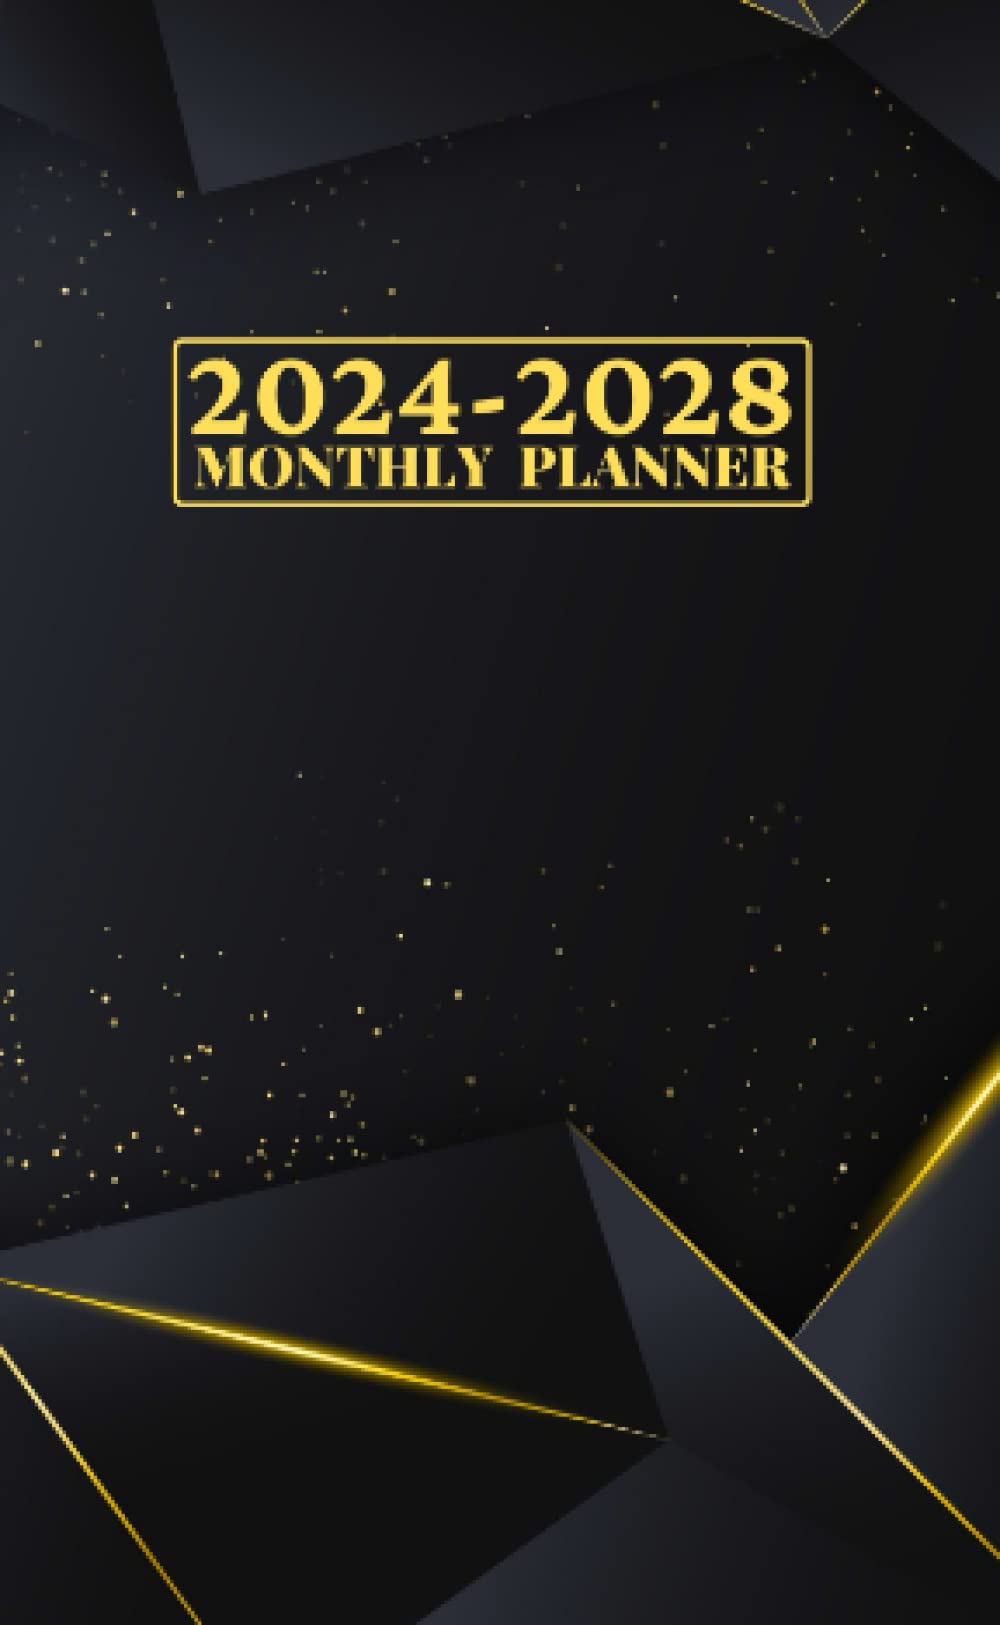 2024-2028 Monthly Pocket Planner: Small 5 Year Monthly Pocket Calendar for Purse with Goals, Calendar, Schedule Organizer | 60 Months Calendar Monthly ... & family Birthdays, contacts -Floral Cover